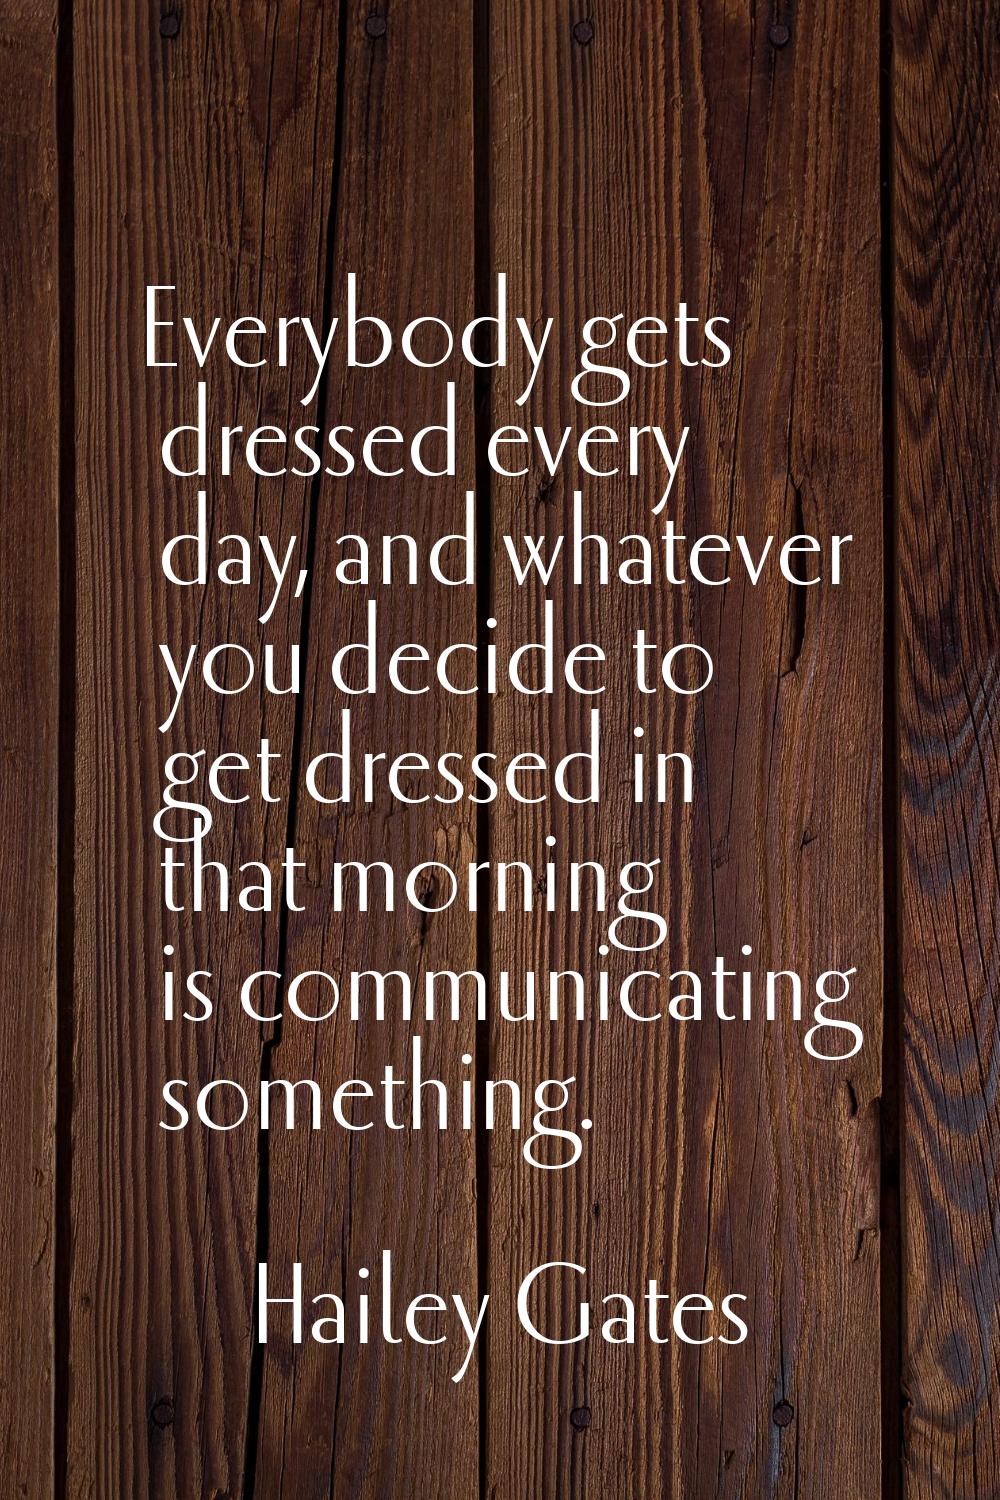 Everybody gets dressed every day, and whatever you decide to get dressed in that morning is communi